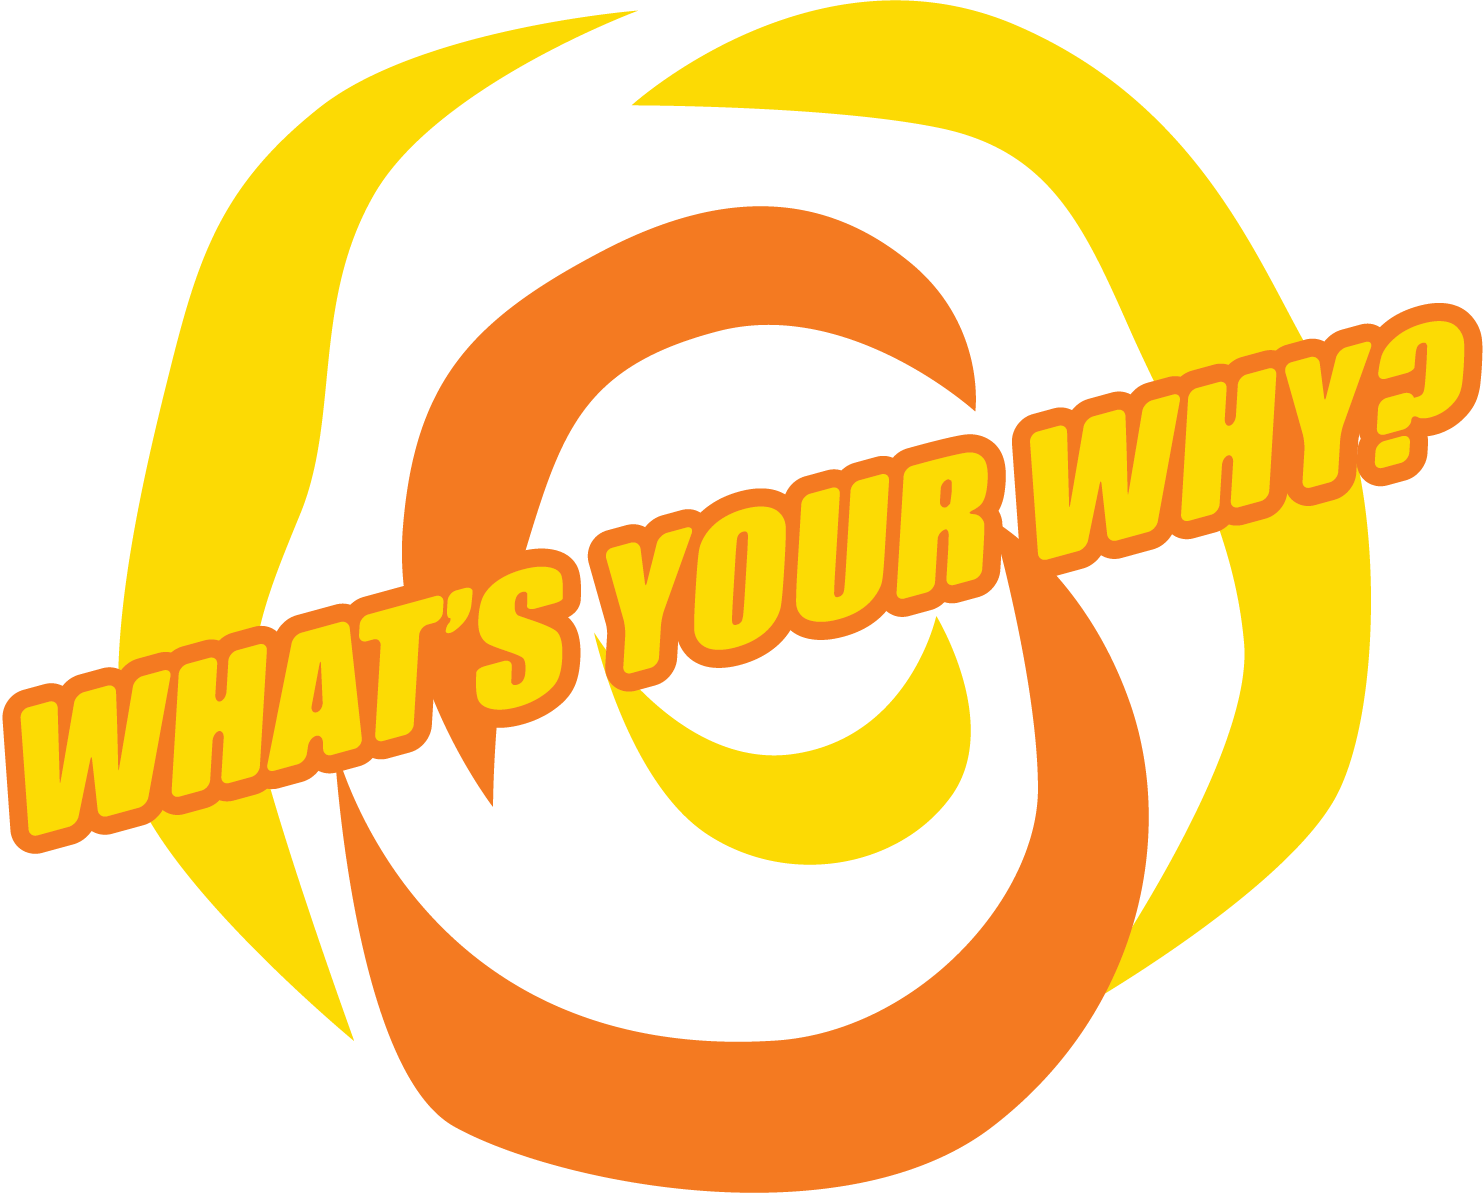 What's Your Why